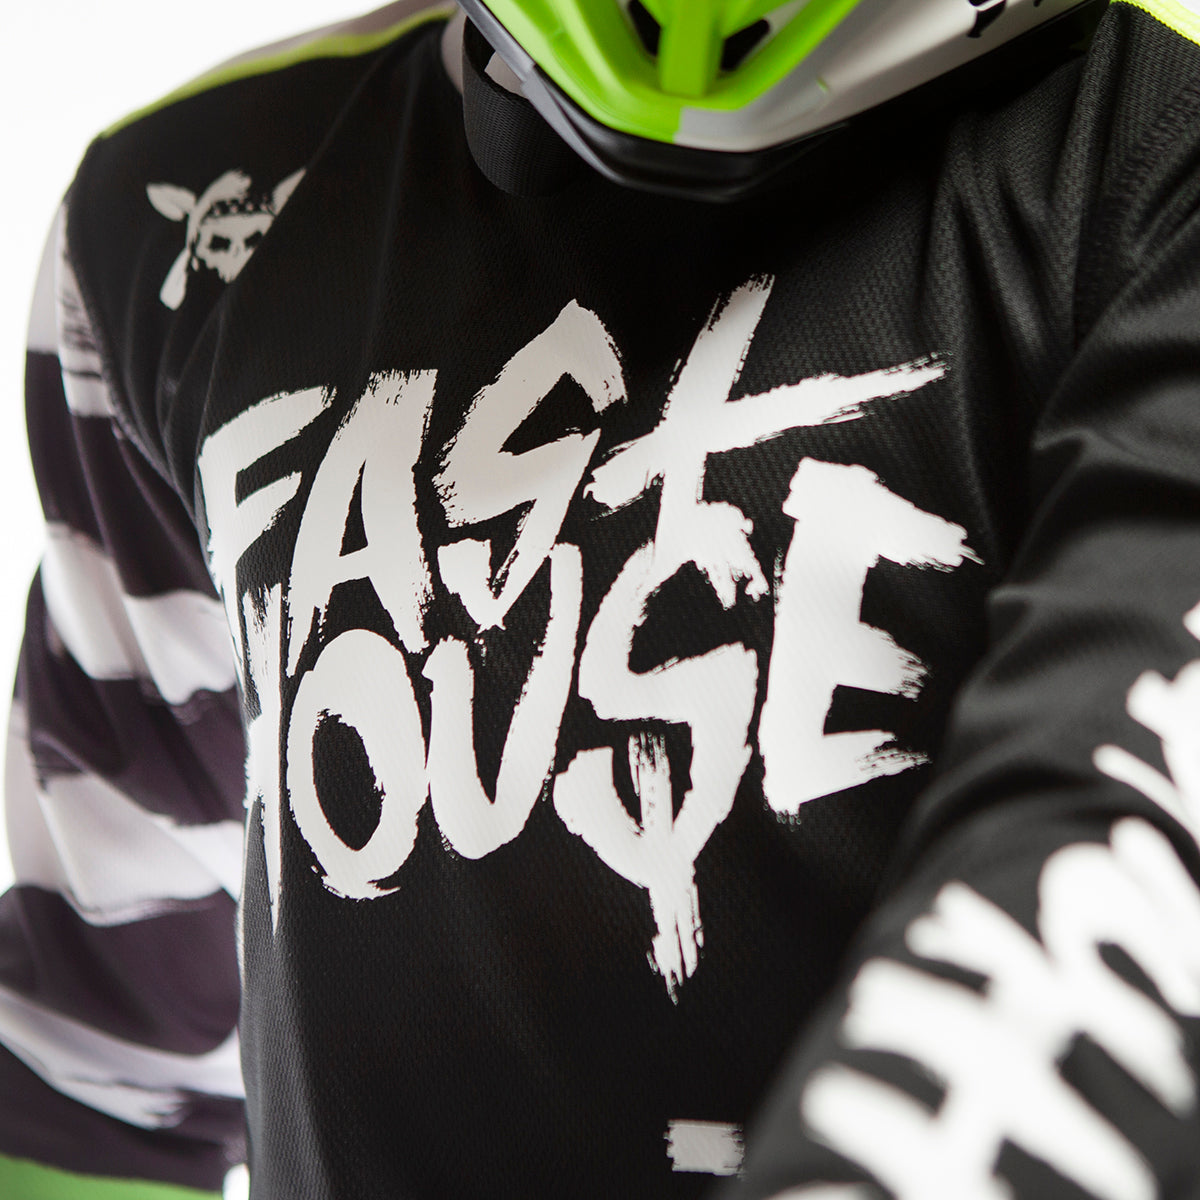 Grindhouse Jester Youth Jersey - Black